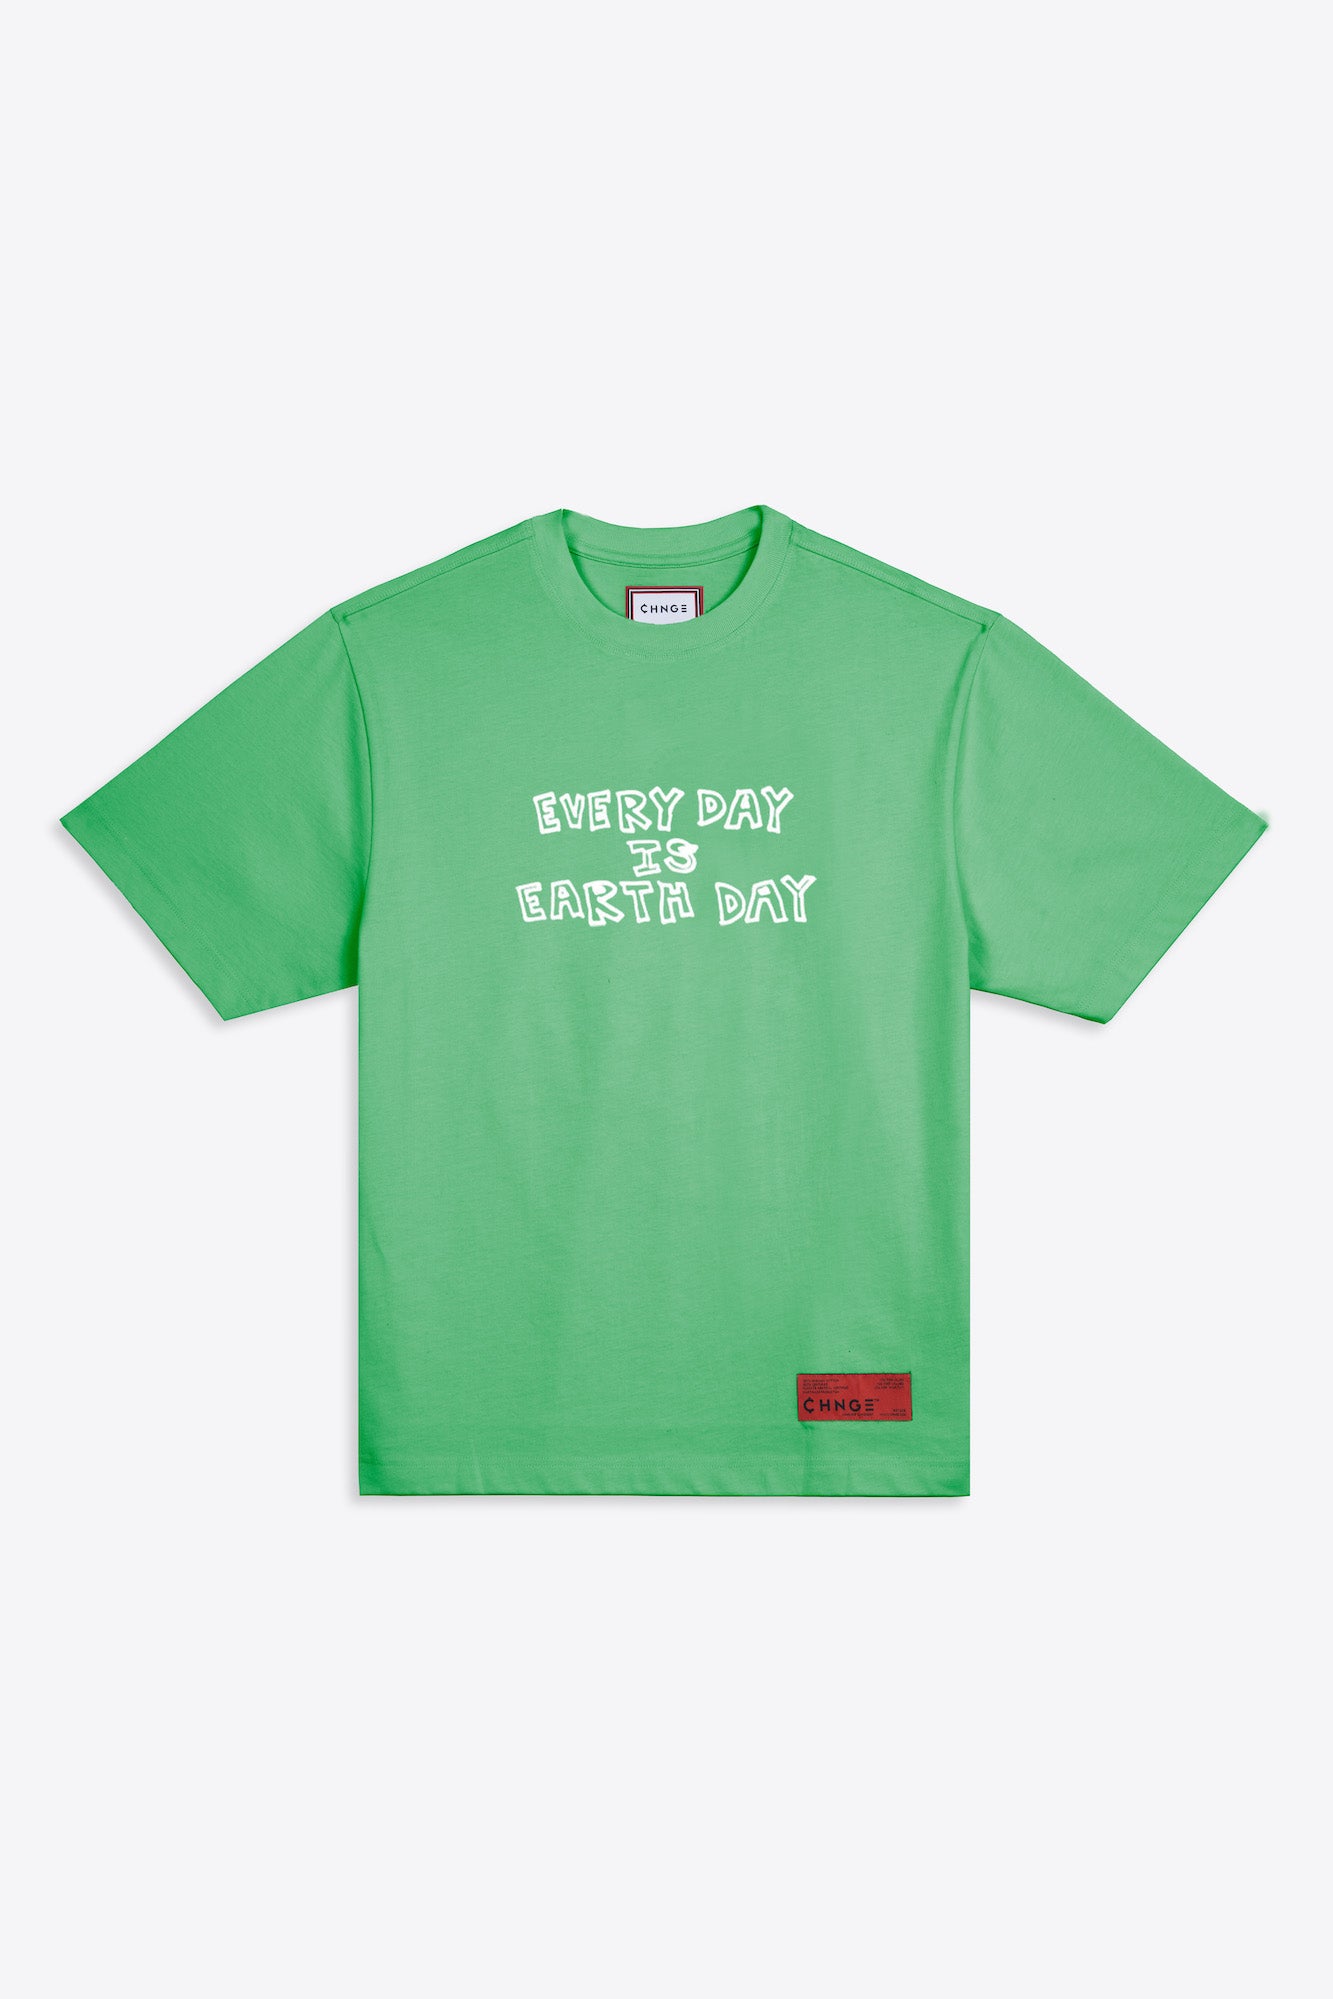 S/S T-Shirt Day Green) Every Day Earth $42 (Kelly